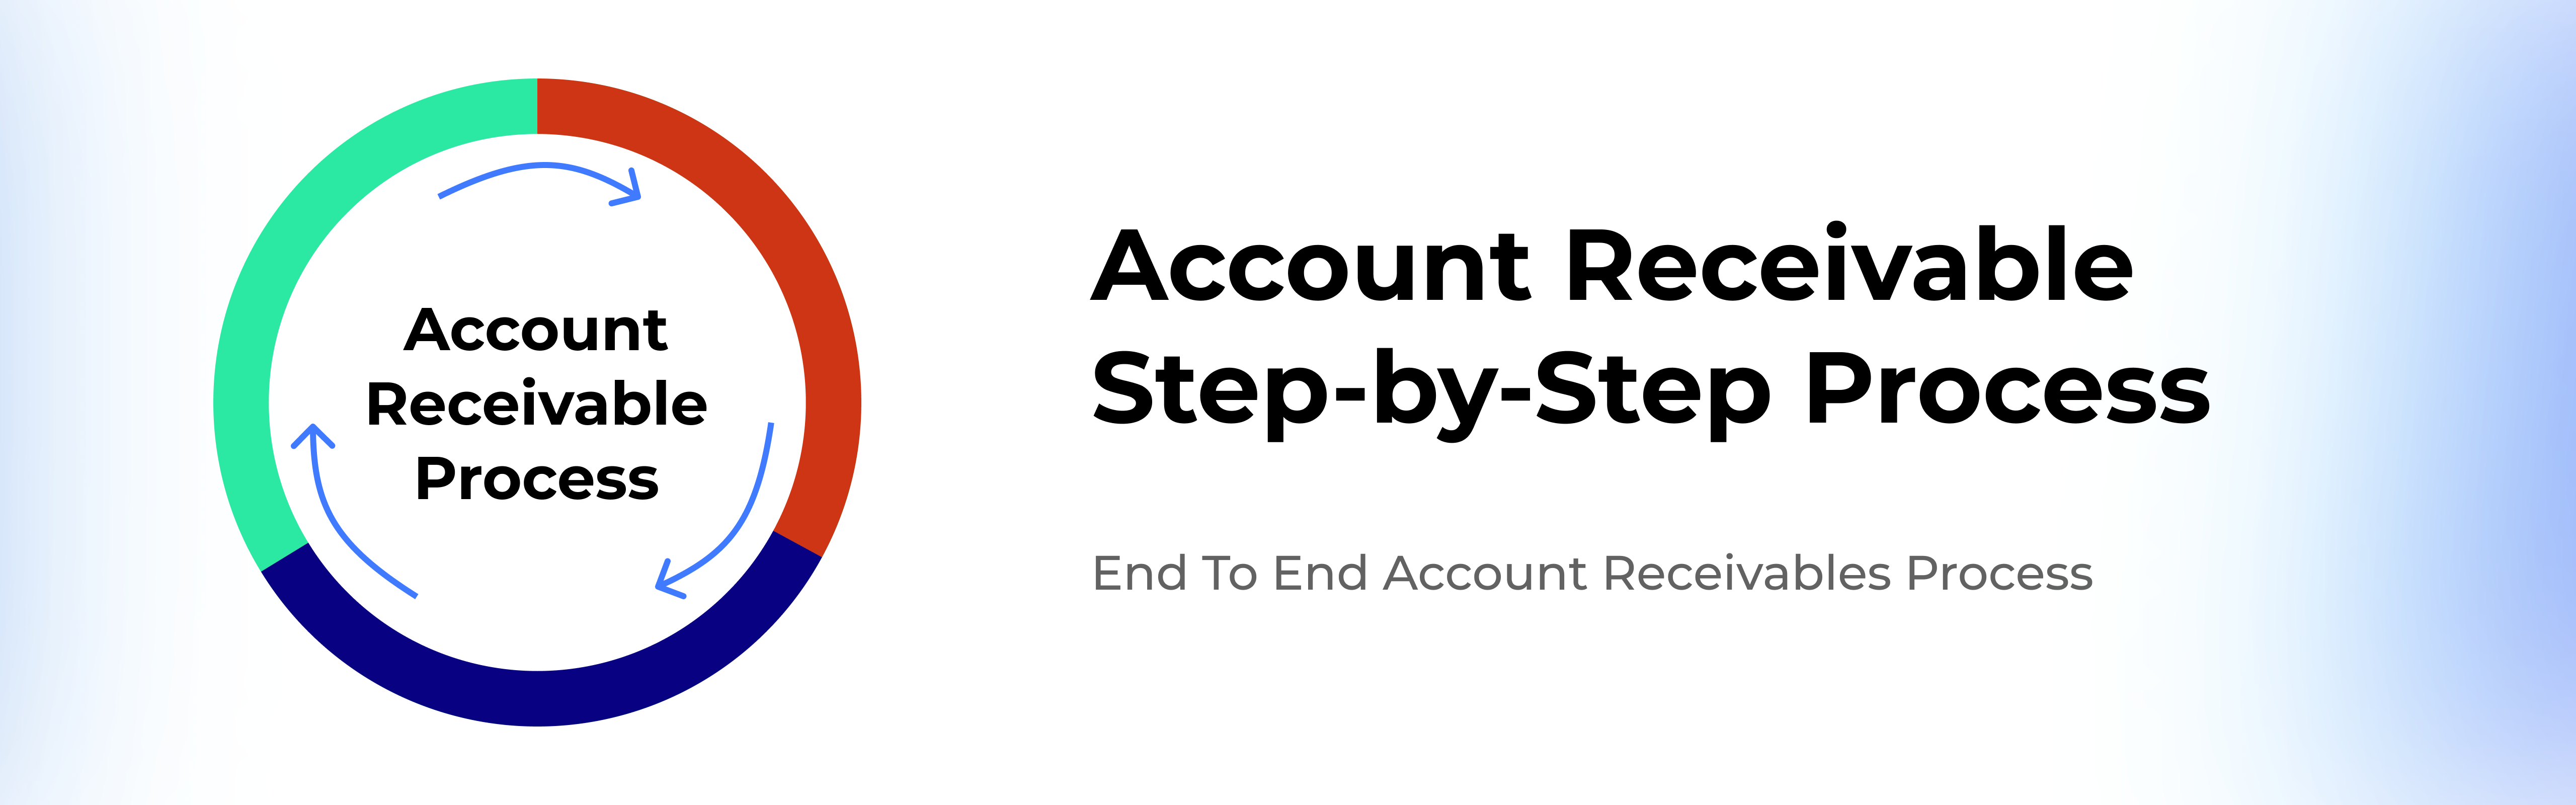 Accounts Receivable Process Full Cycle | Step-by-Step - Zetran